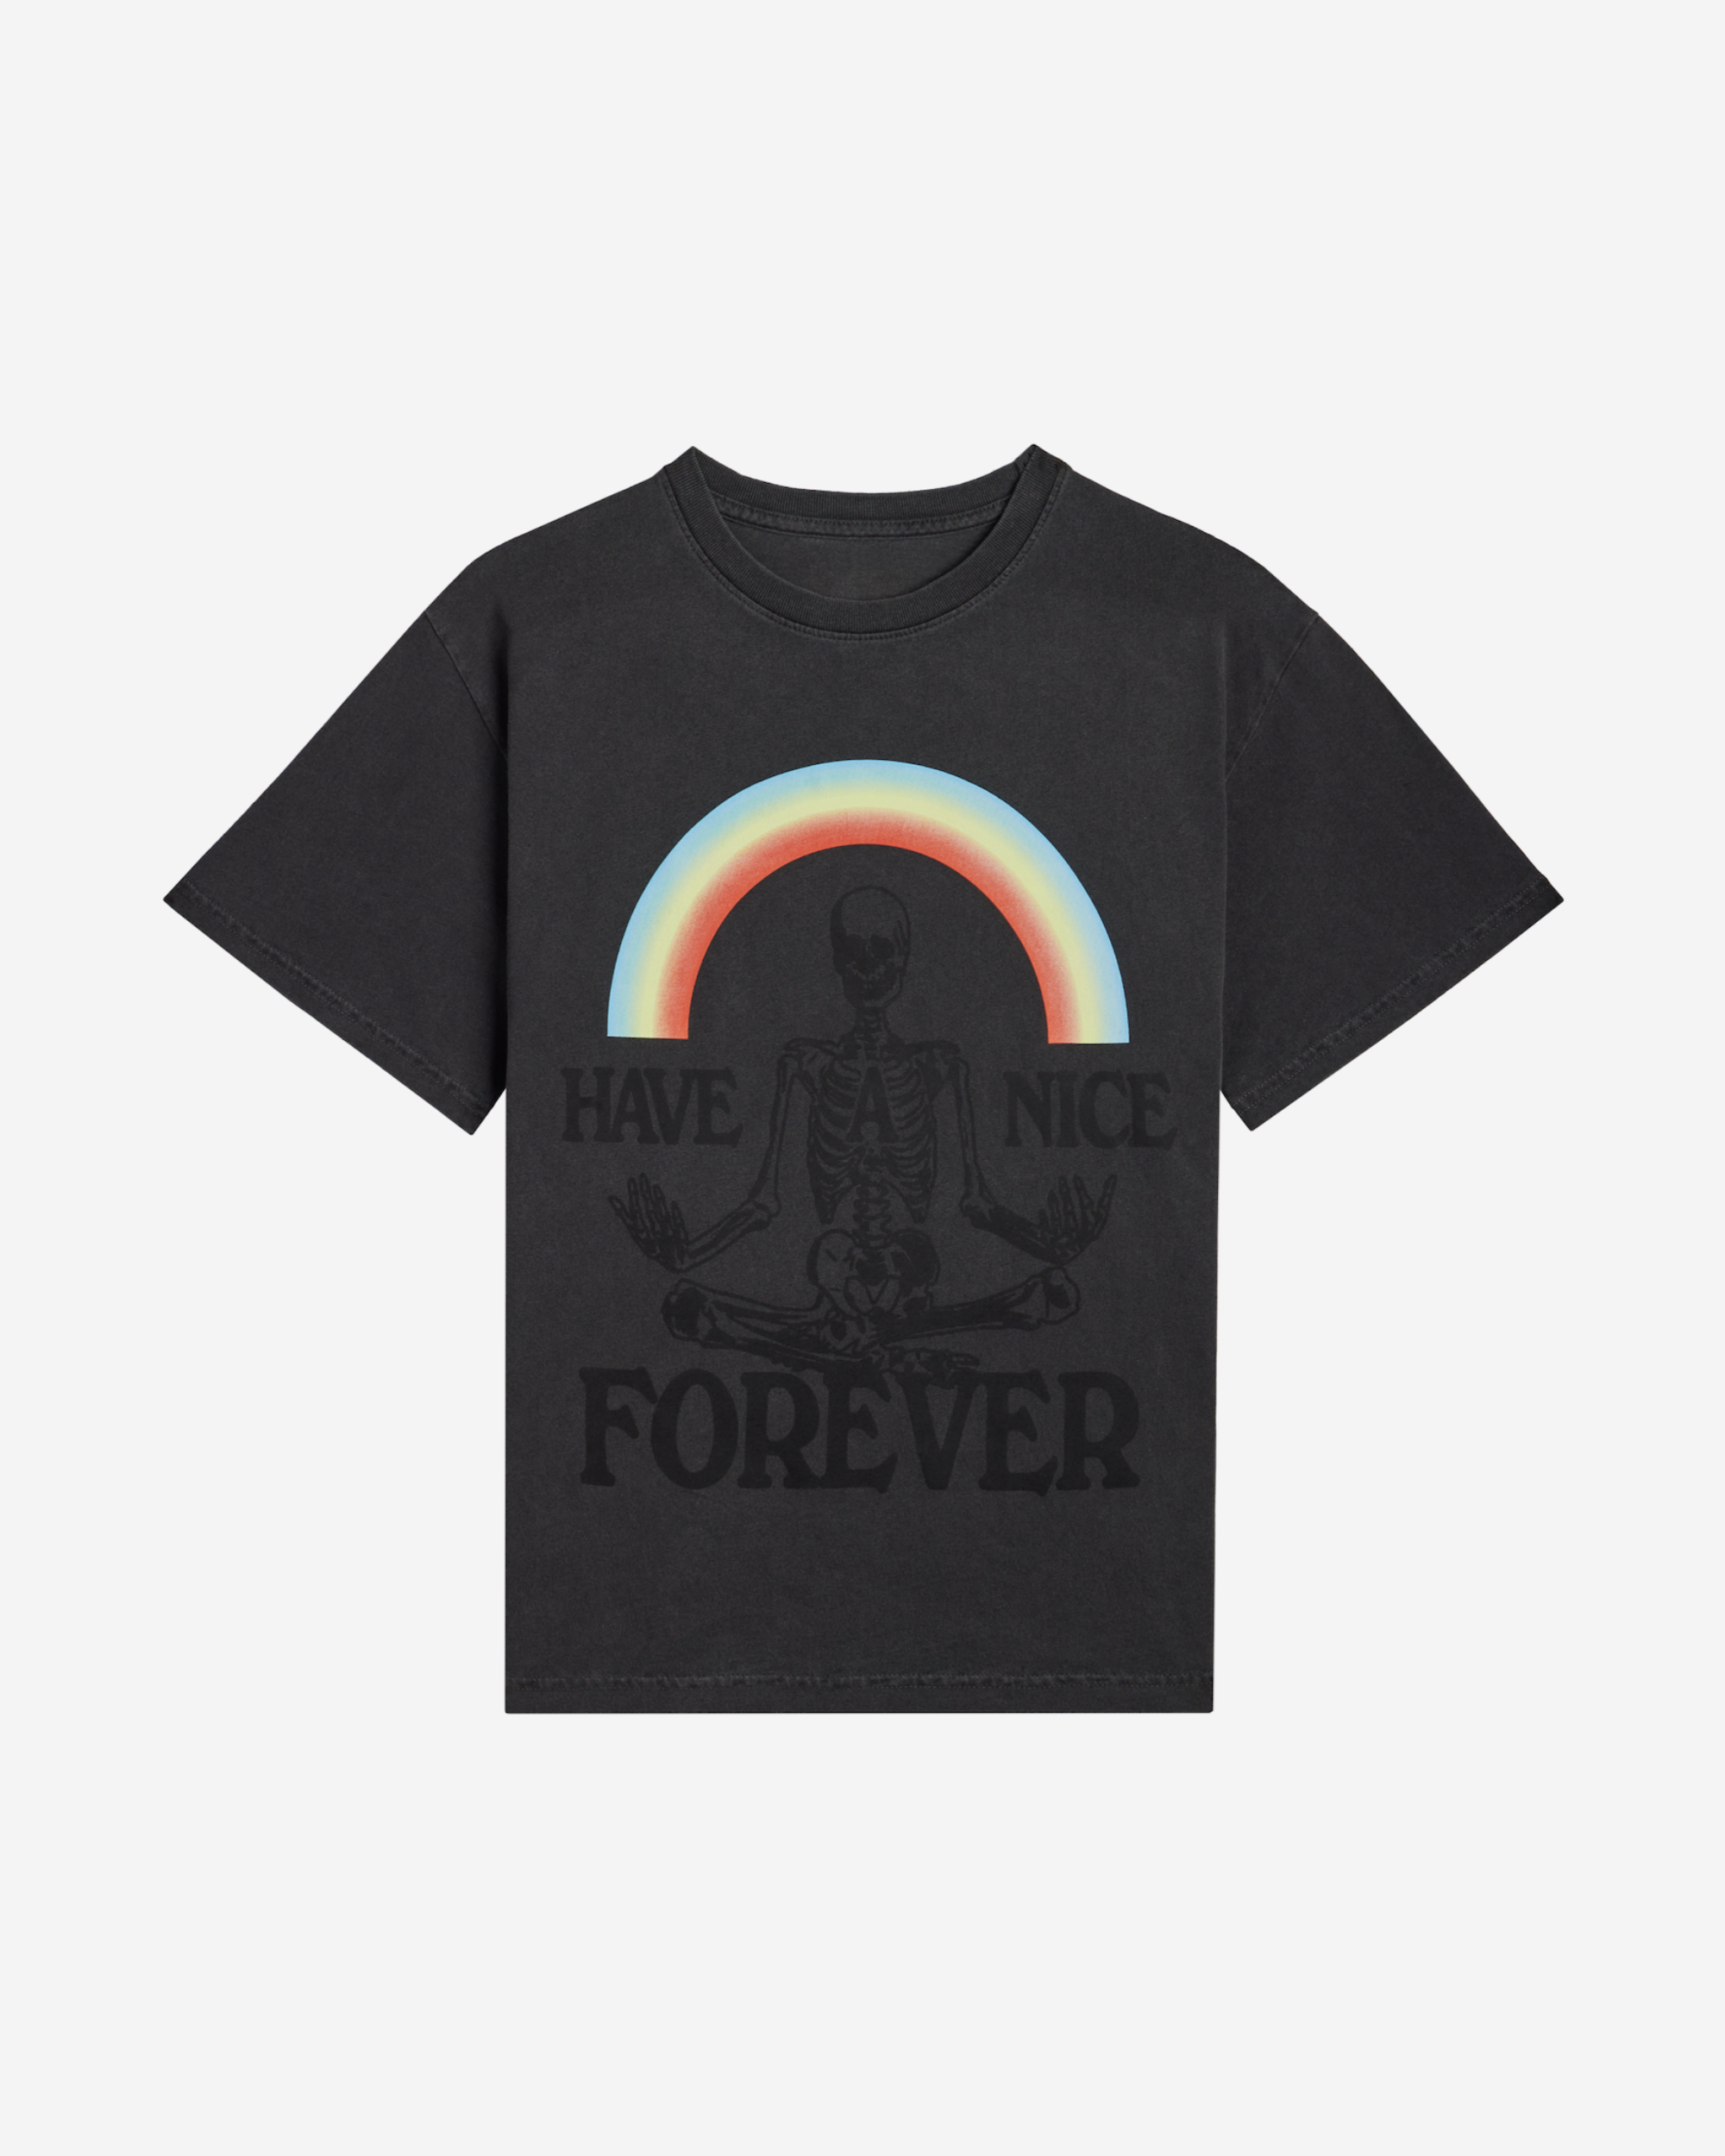 Have a Nice Forever Tee